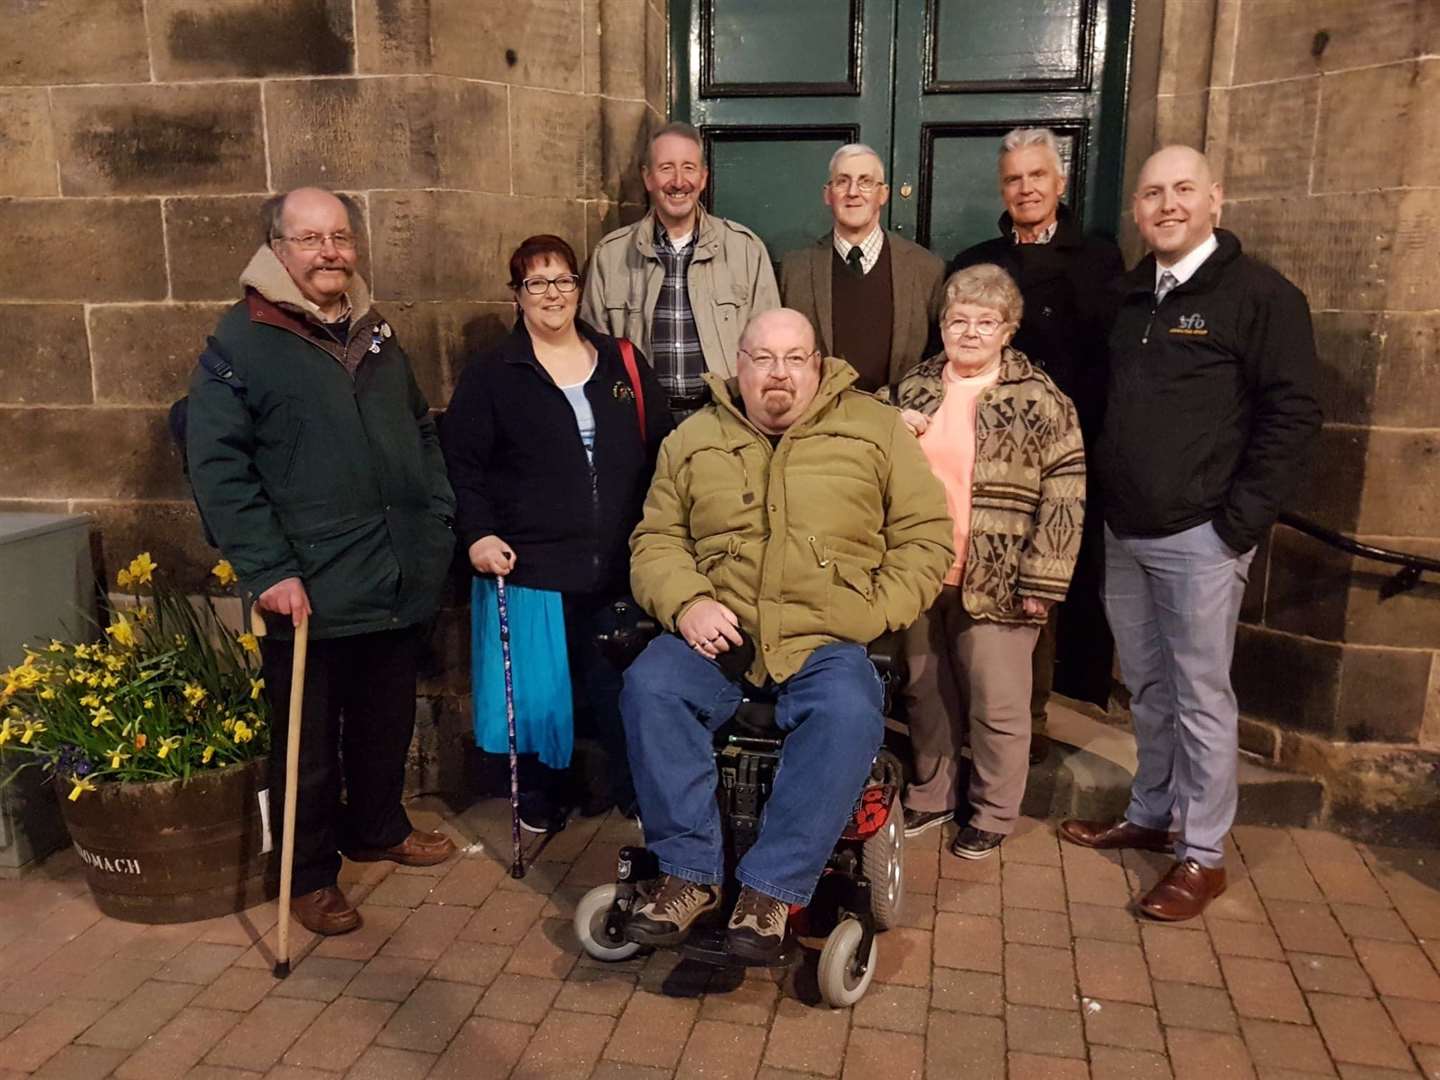 Forres Community Council are (from left) David Parker, Fiona Graham, Mike Walker, Kenny Shand, Graham Murdoch, Lesley Edwards, Graham Hilditch and Shaun Moat. Alan Tissiman and Gordon Thornton are not in the picture.